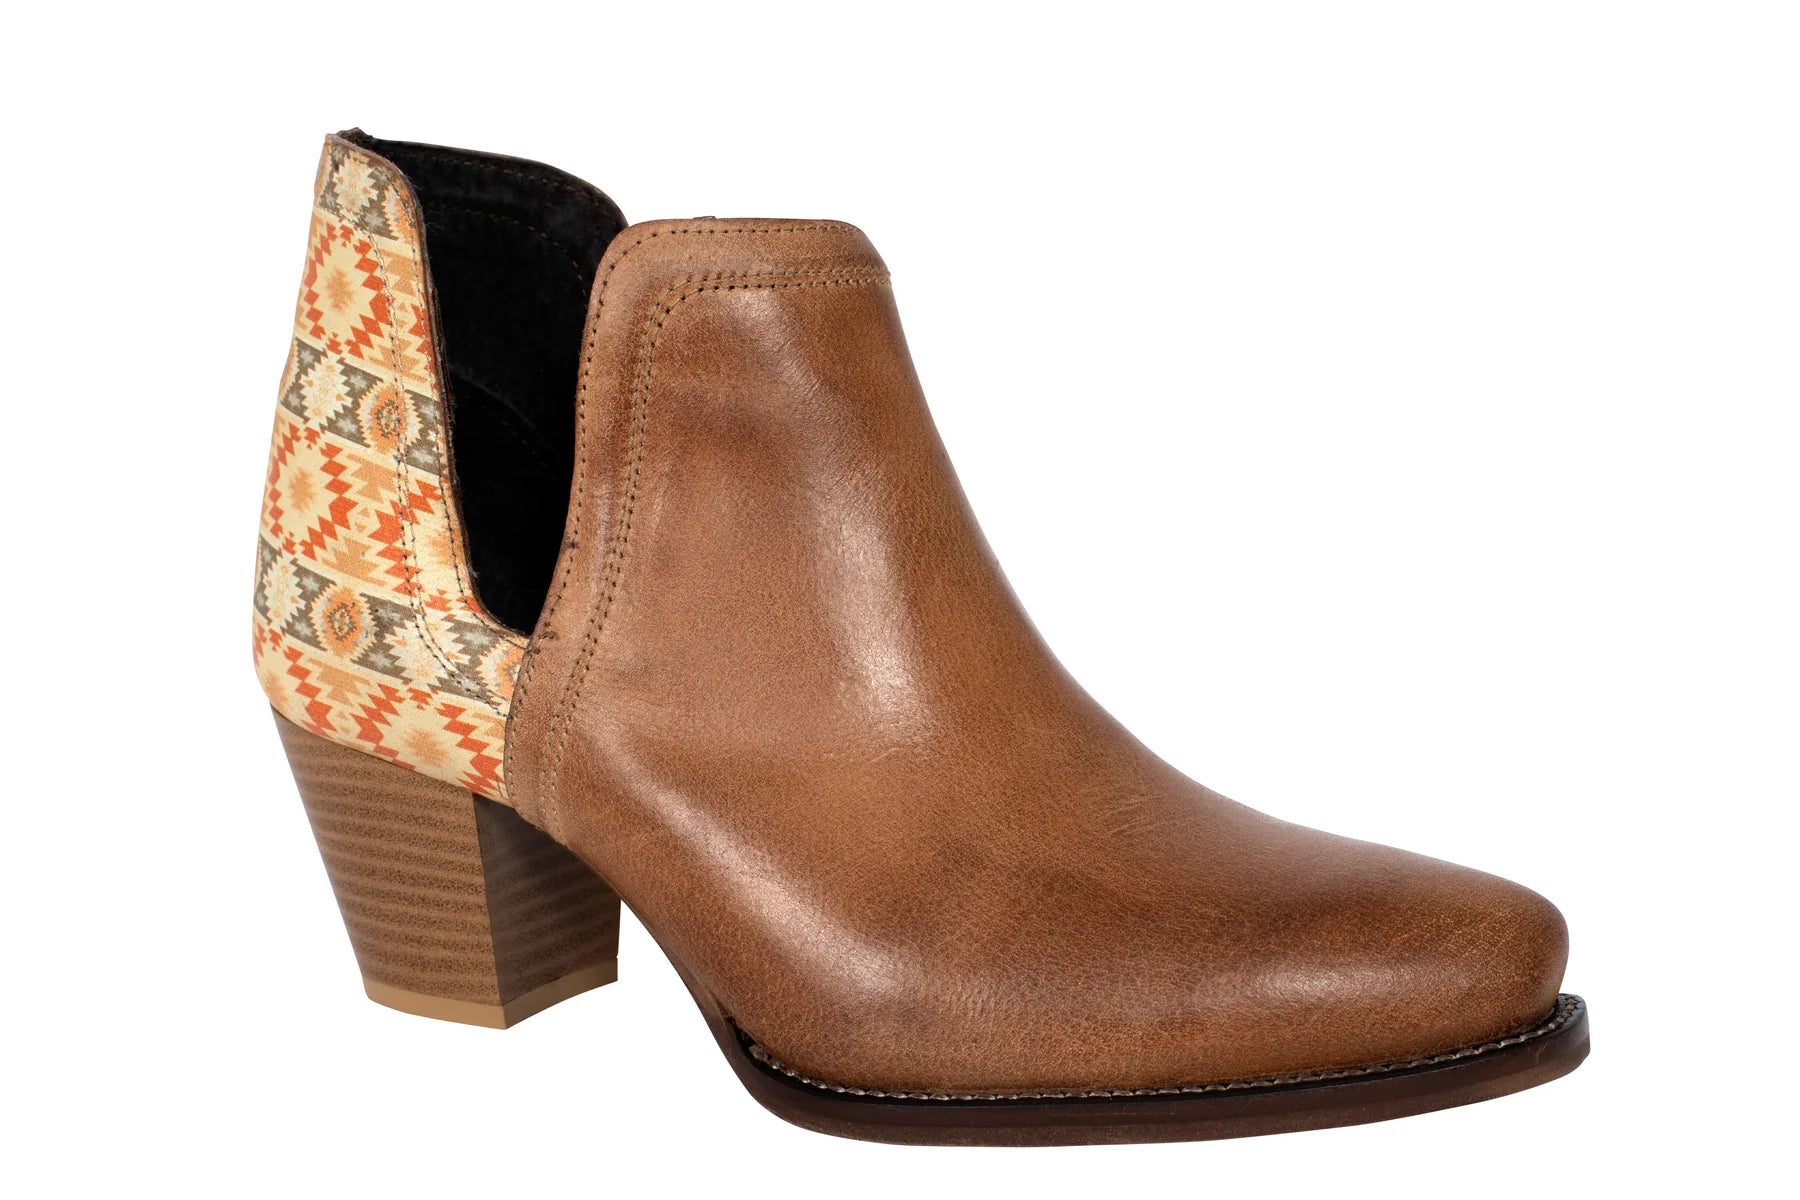 Roper Wms Rowdy Aztec Tan/Aztec Leather - Mothers Day Sale